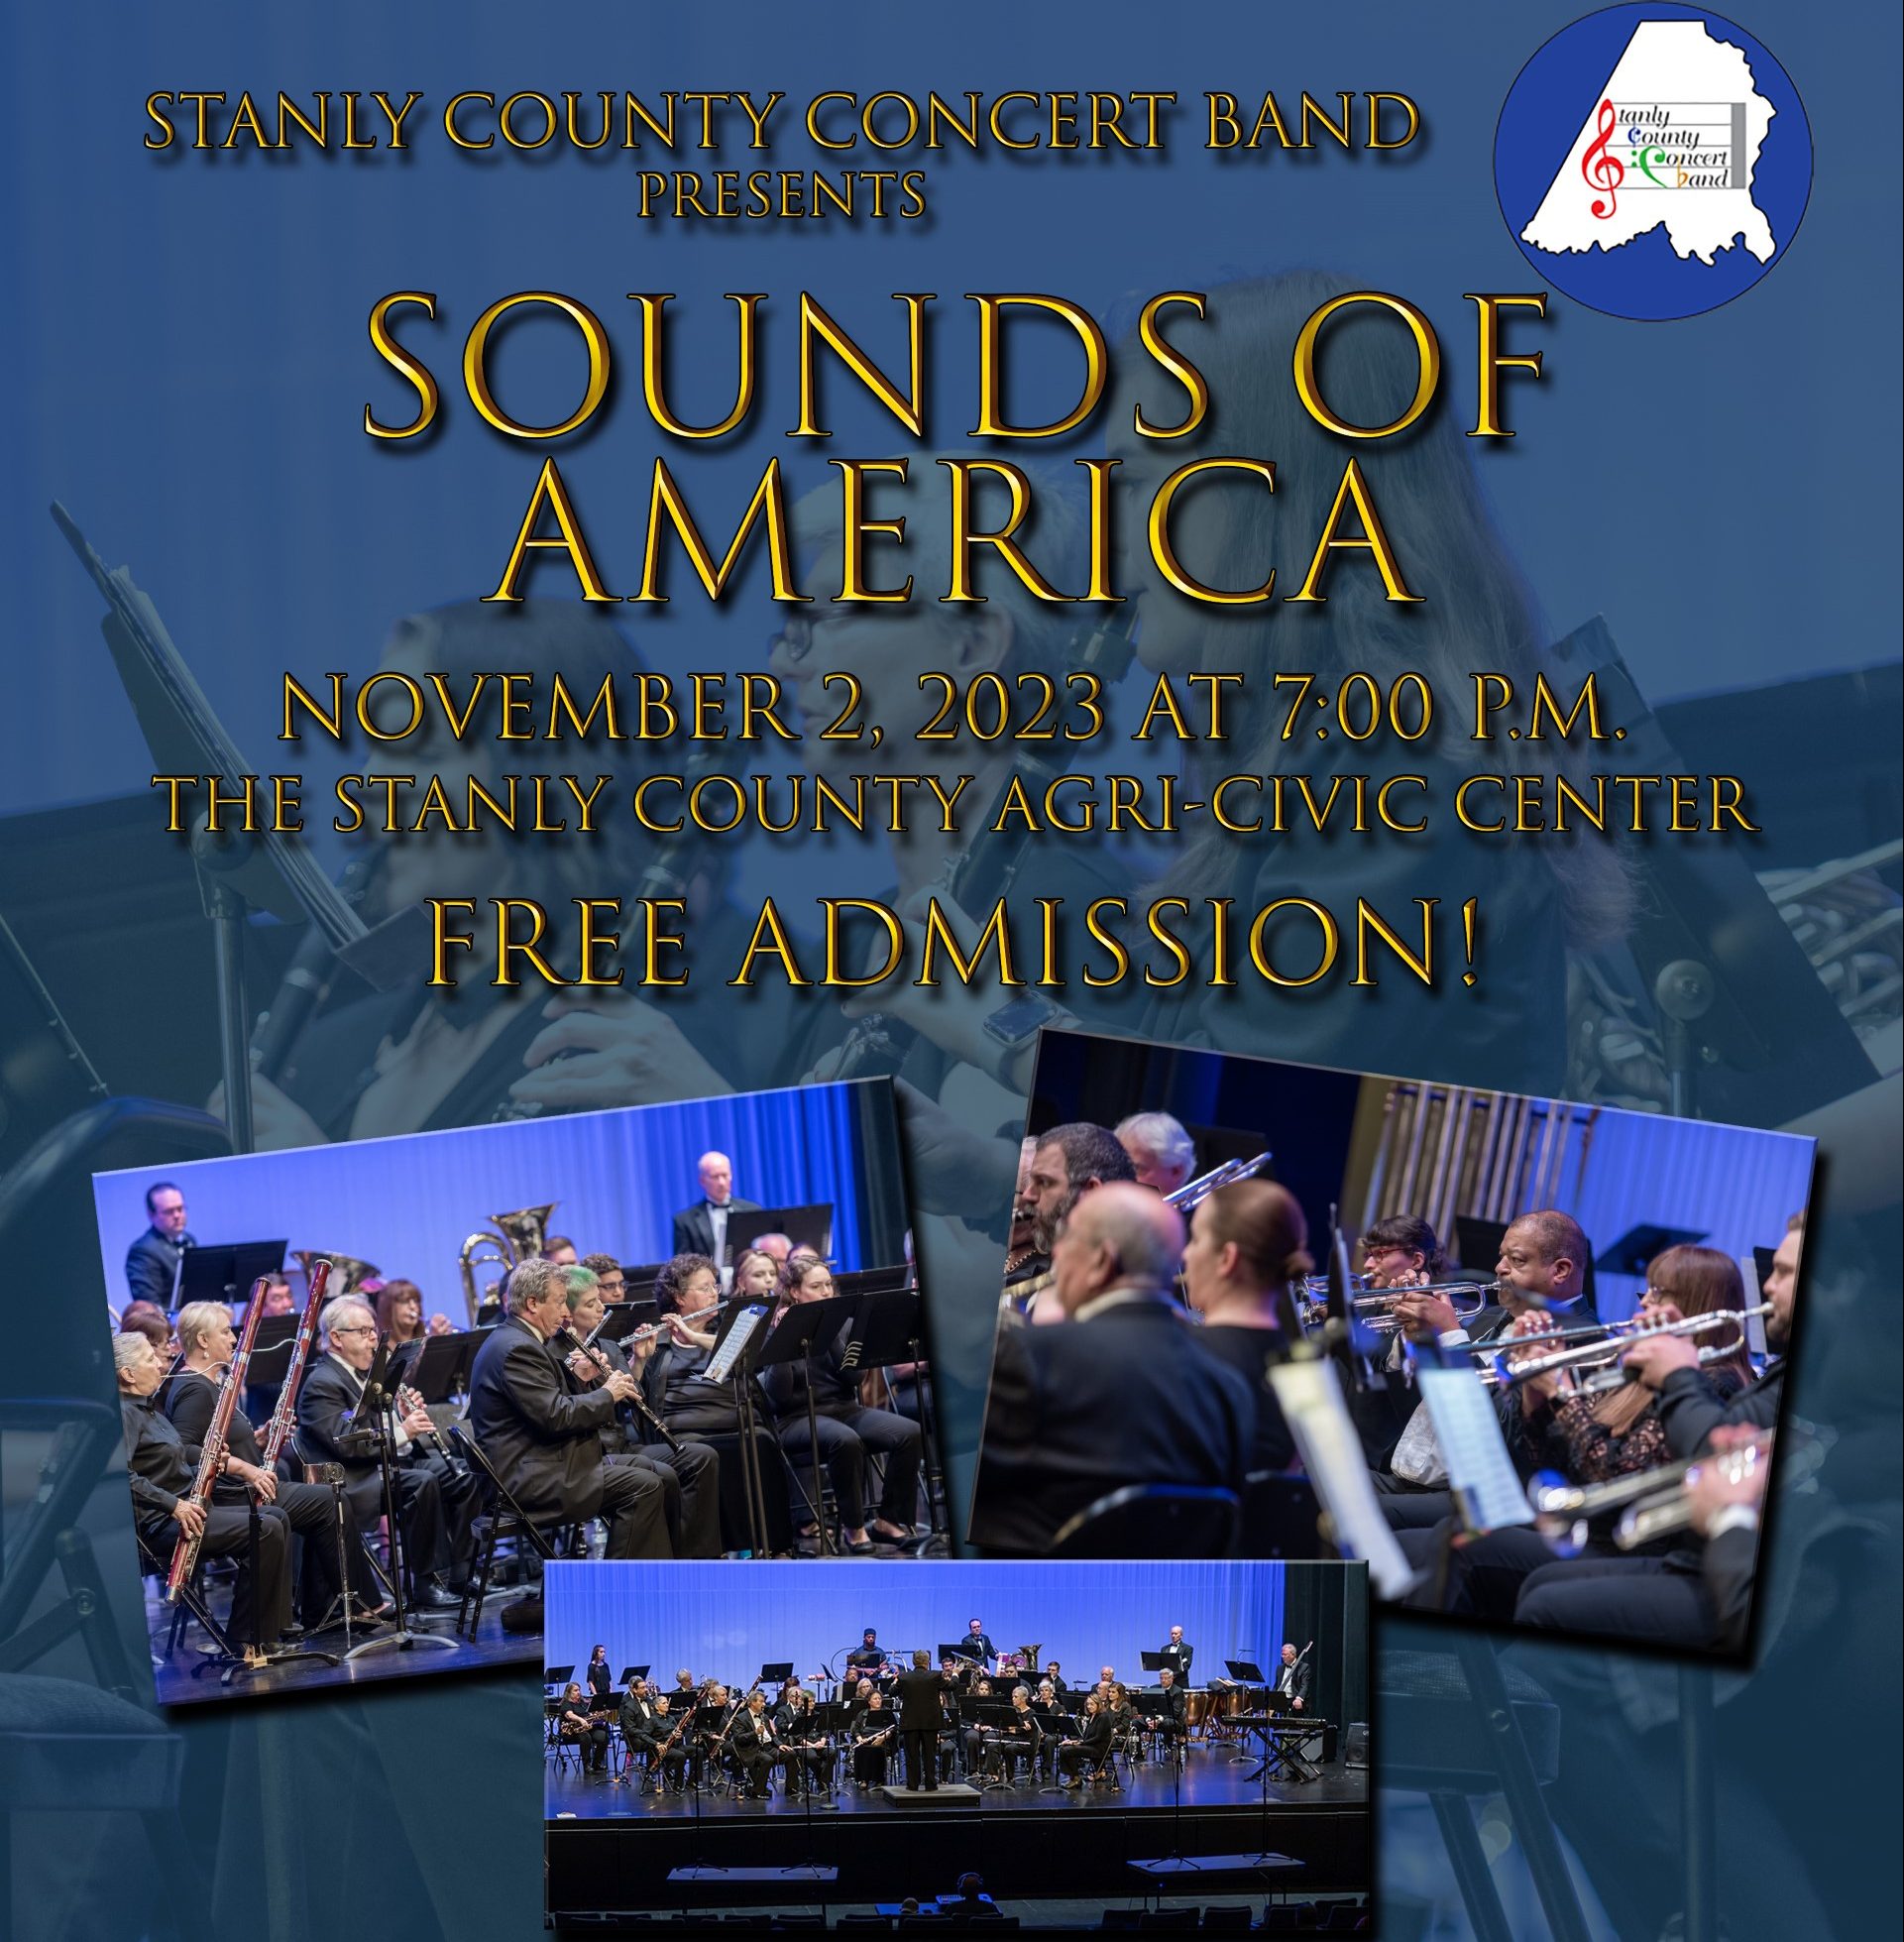 The Stanly County Concert Band presents Sounds of America